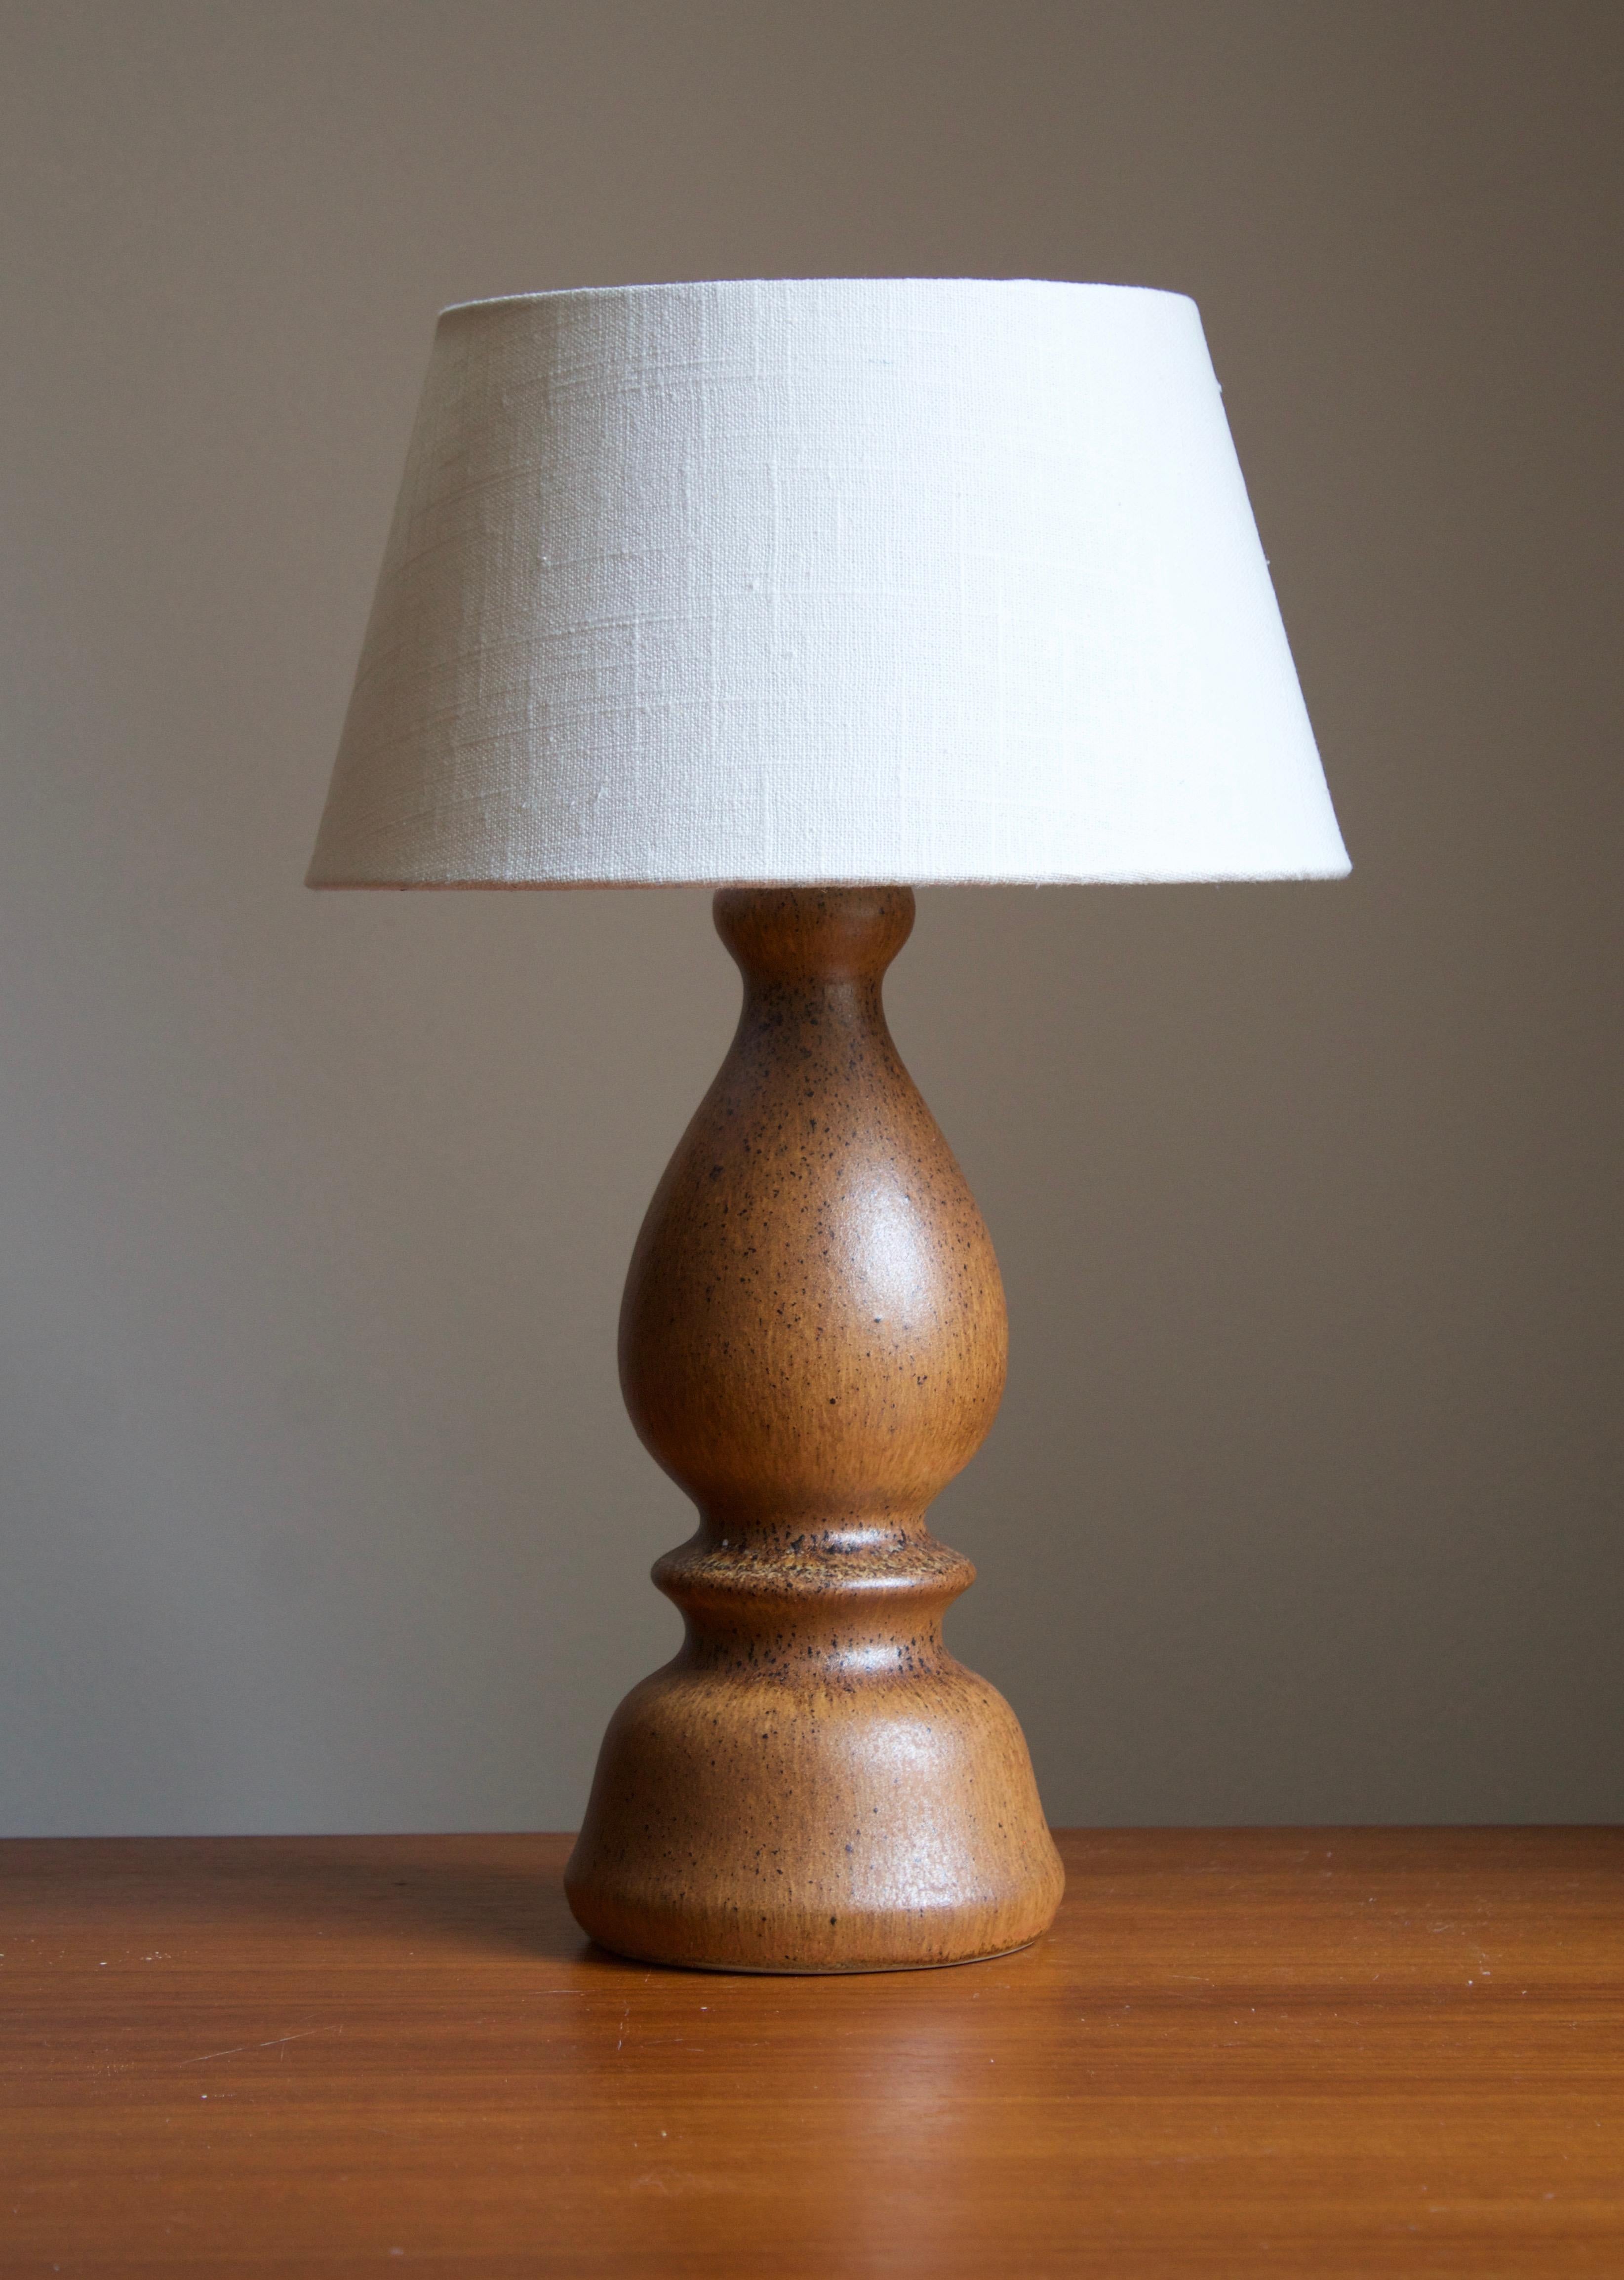 A stoneware table lamp, executed by Bruno Karlsson. In his Studio, called 